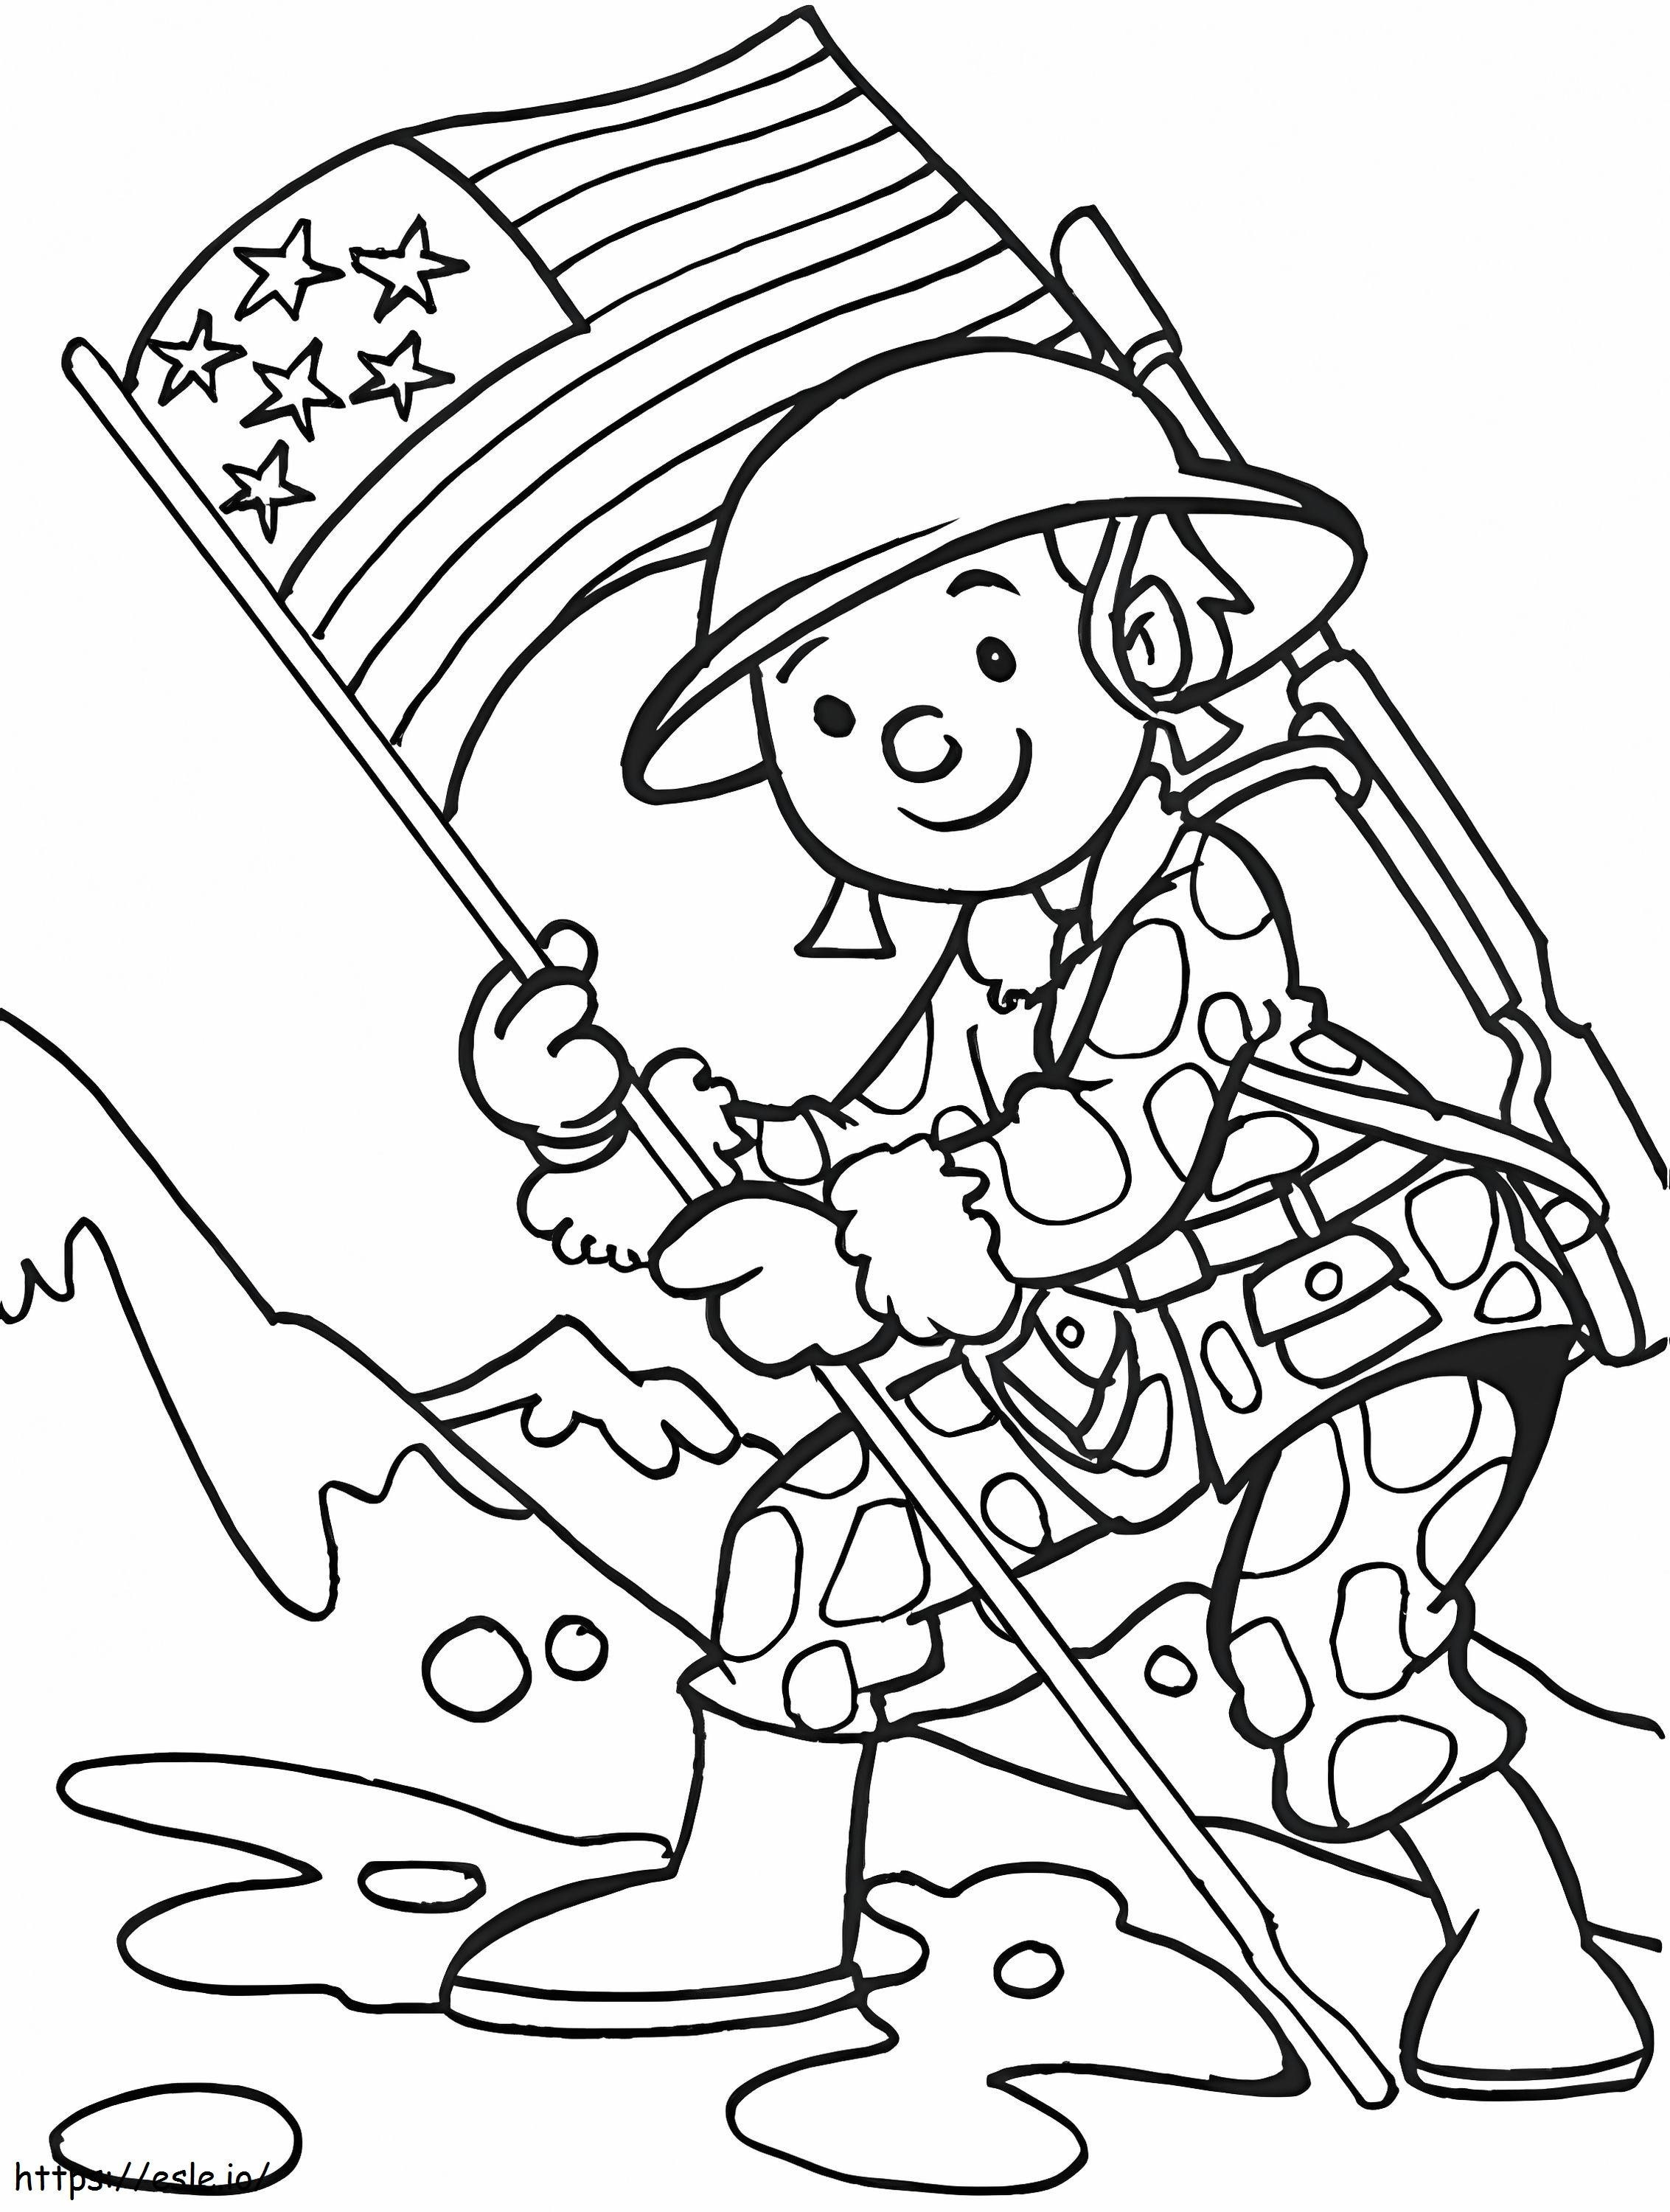 Veterans Day 4 coloring page